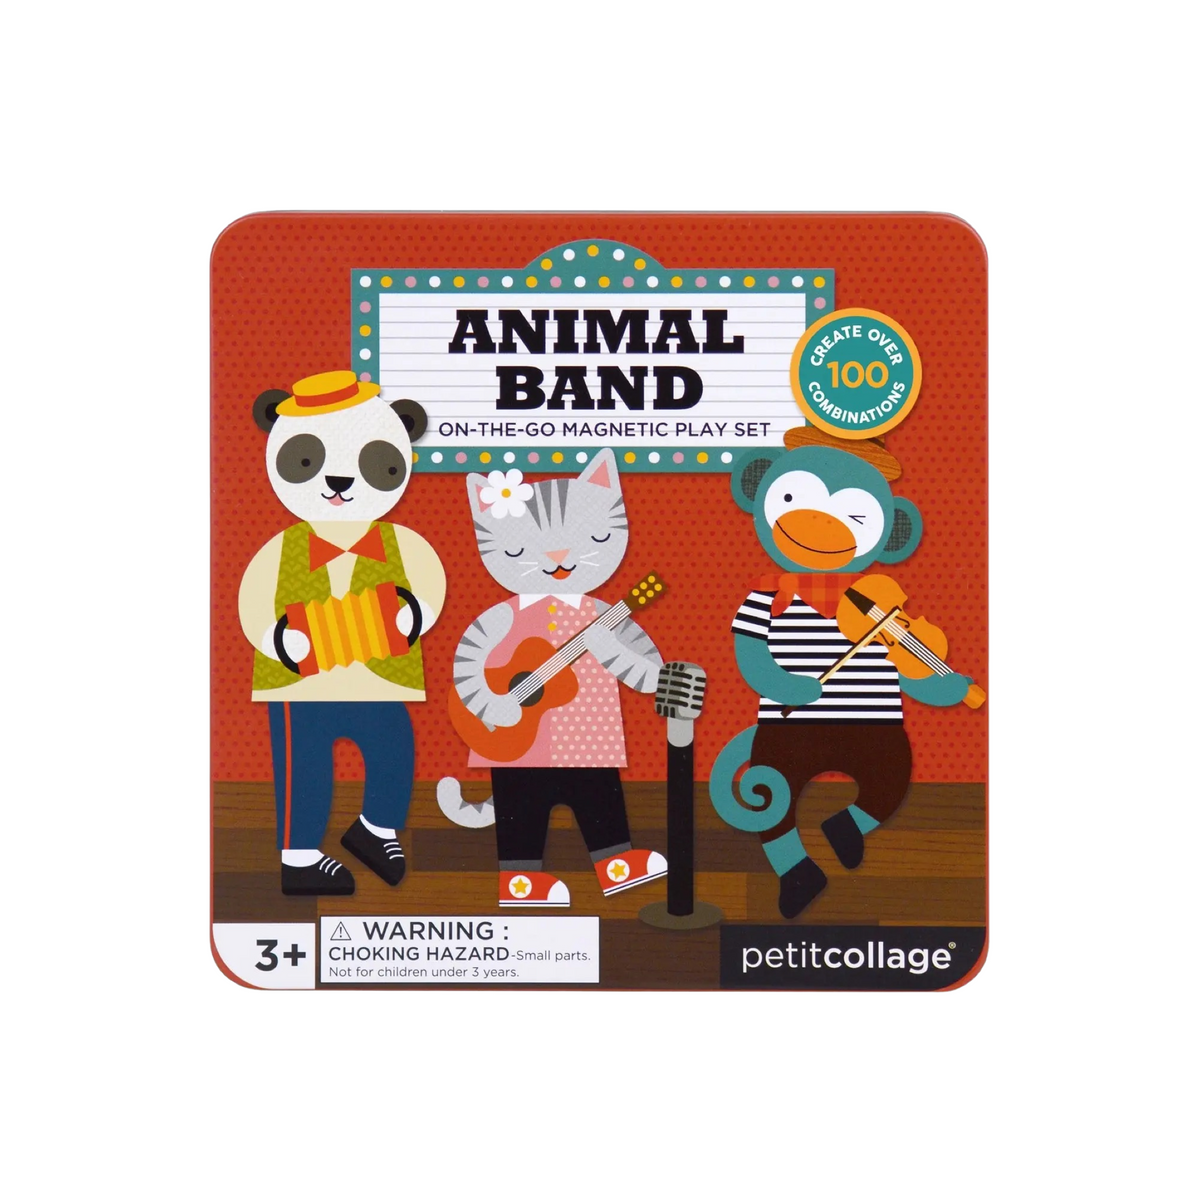 Animal Band On-the-Go Magnetic Pay Set